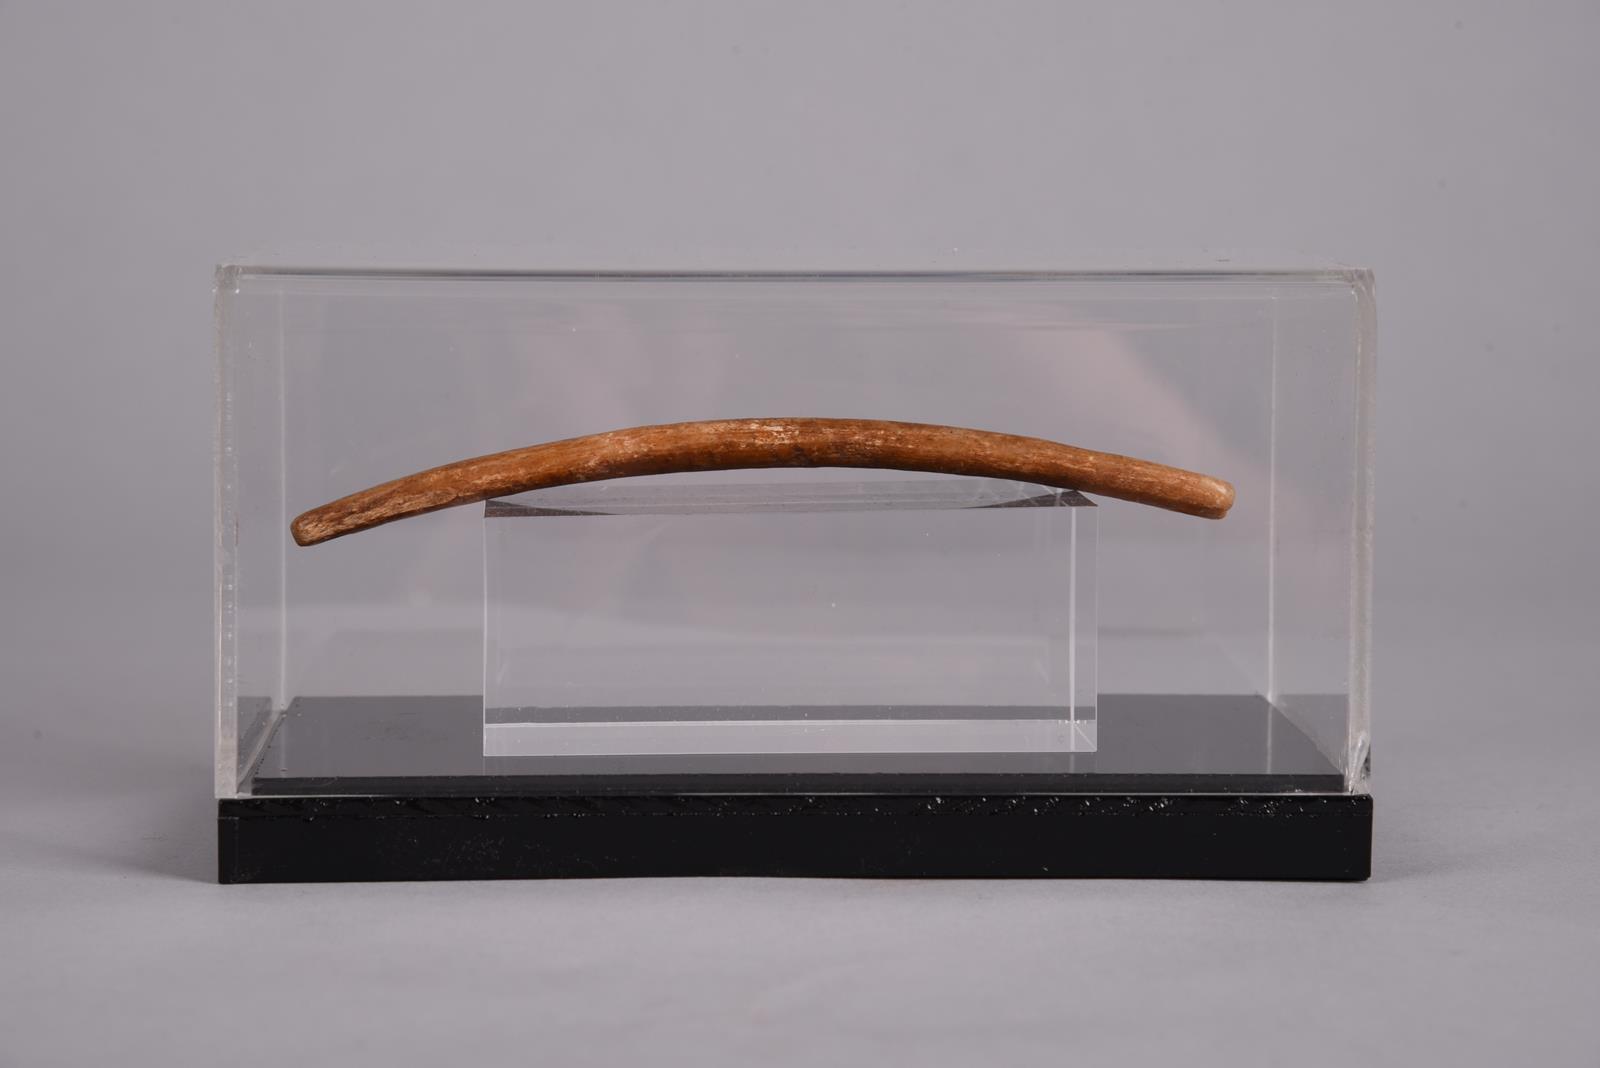 An Inuit handle bag handle Arctic, 19th century bone, curved with attachment holes and grooves to - Image 2 of 2